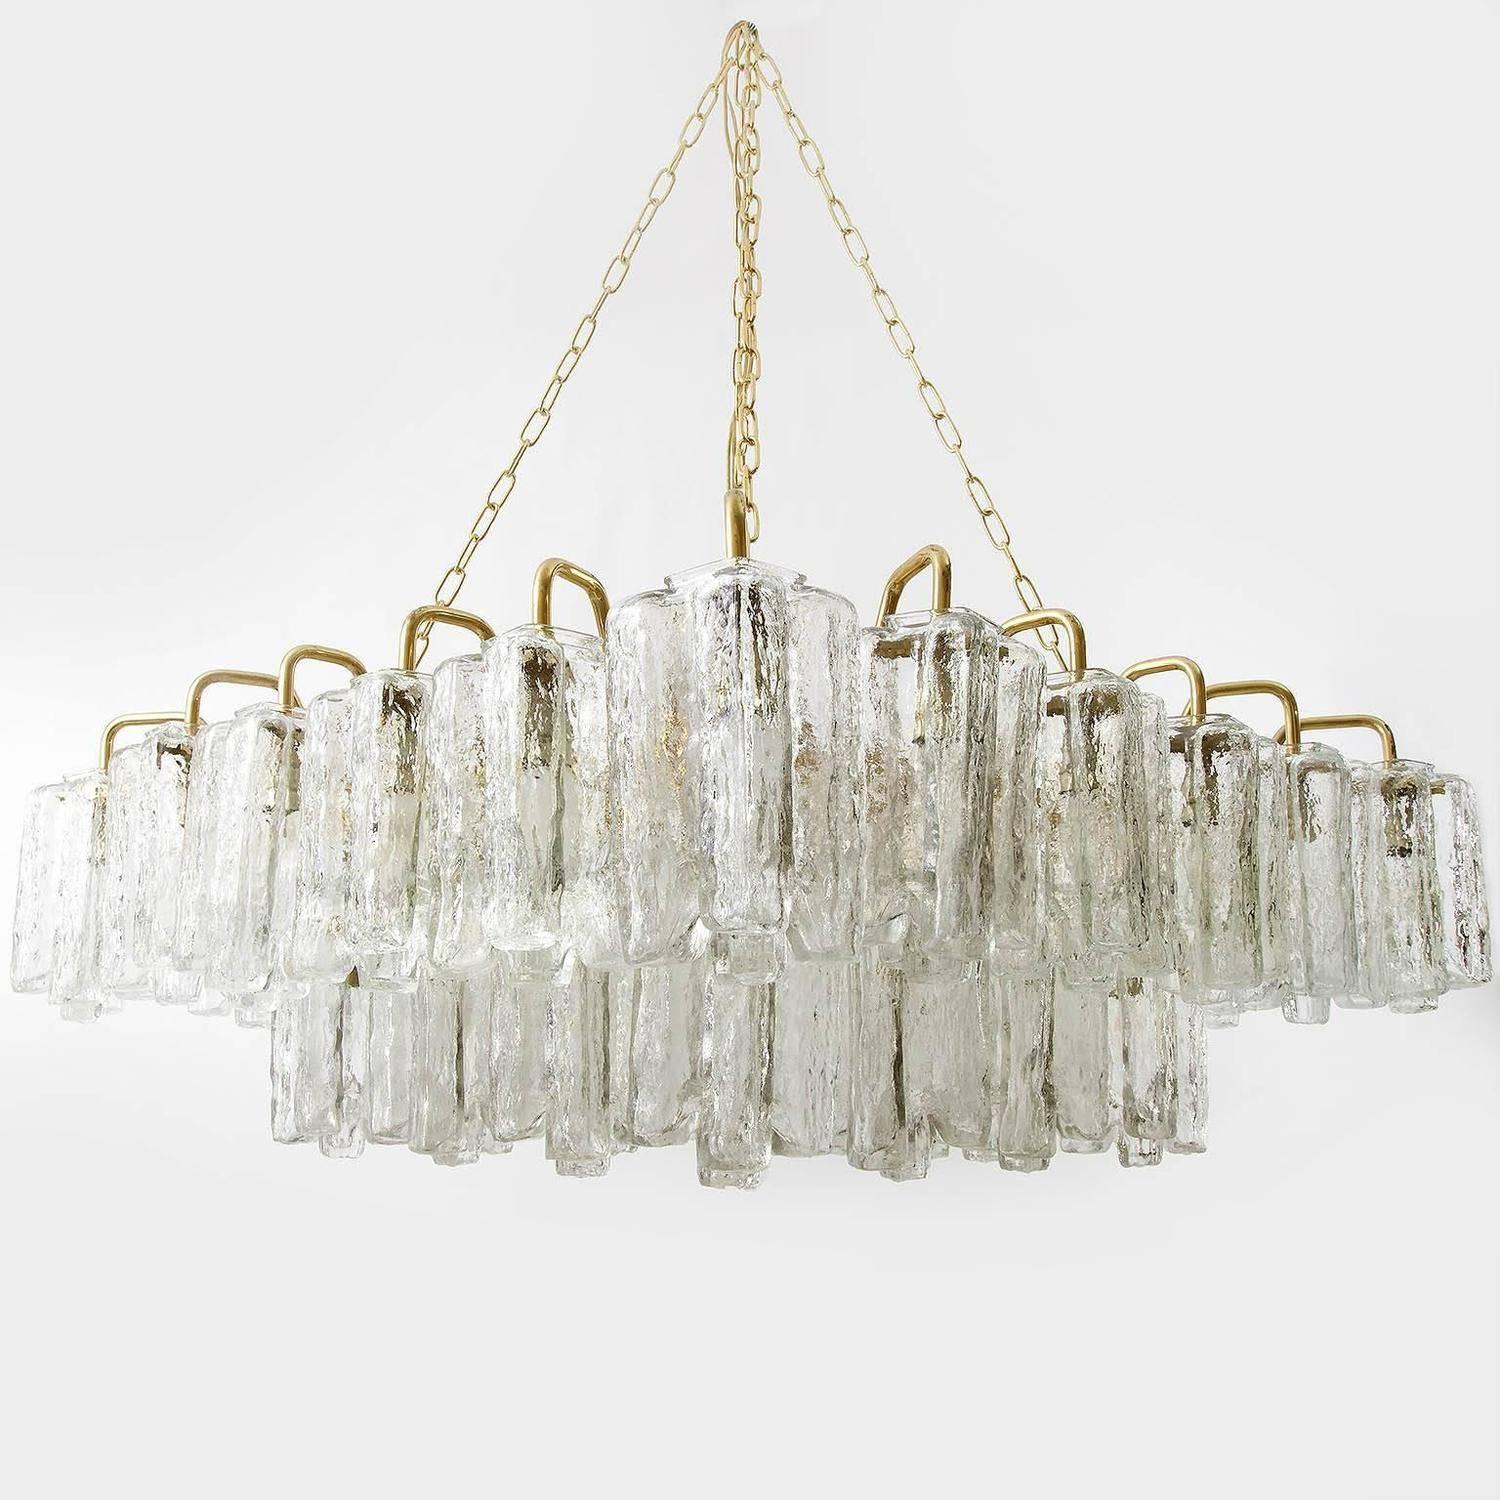 One of four square and very large 'Granada' light fixtures by J.T. Kalmar, Austria, manufactured in midcentury, circa 1970 (late 1960s or early 1970s). 
The lamps can be used as pendant light / chandelier or as flush mount light because they can be